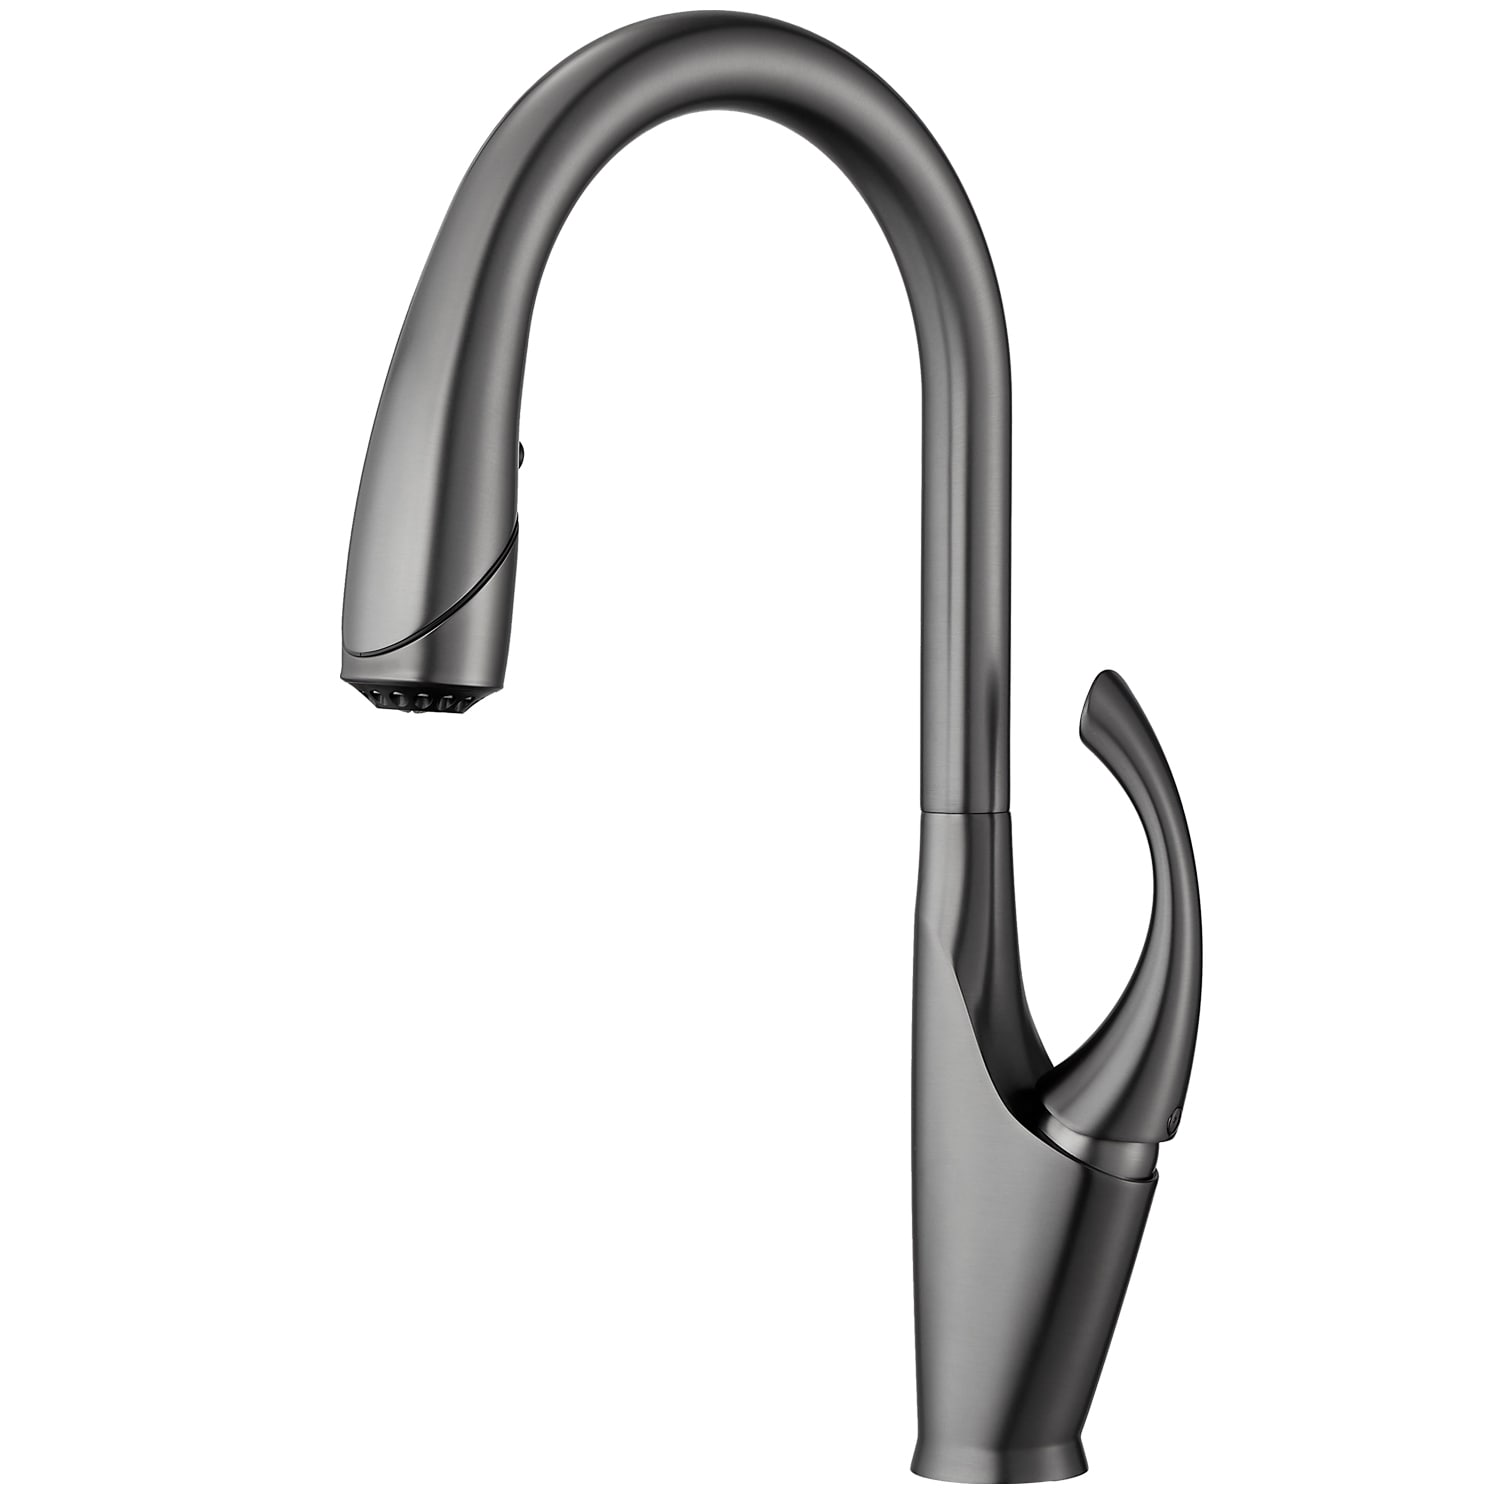 Pouuin Ob Gunmetal Single Handle Pull-down Kitchen Faucet with Sprayer Function